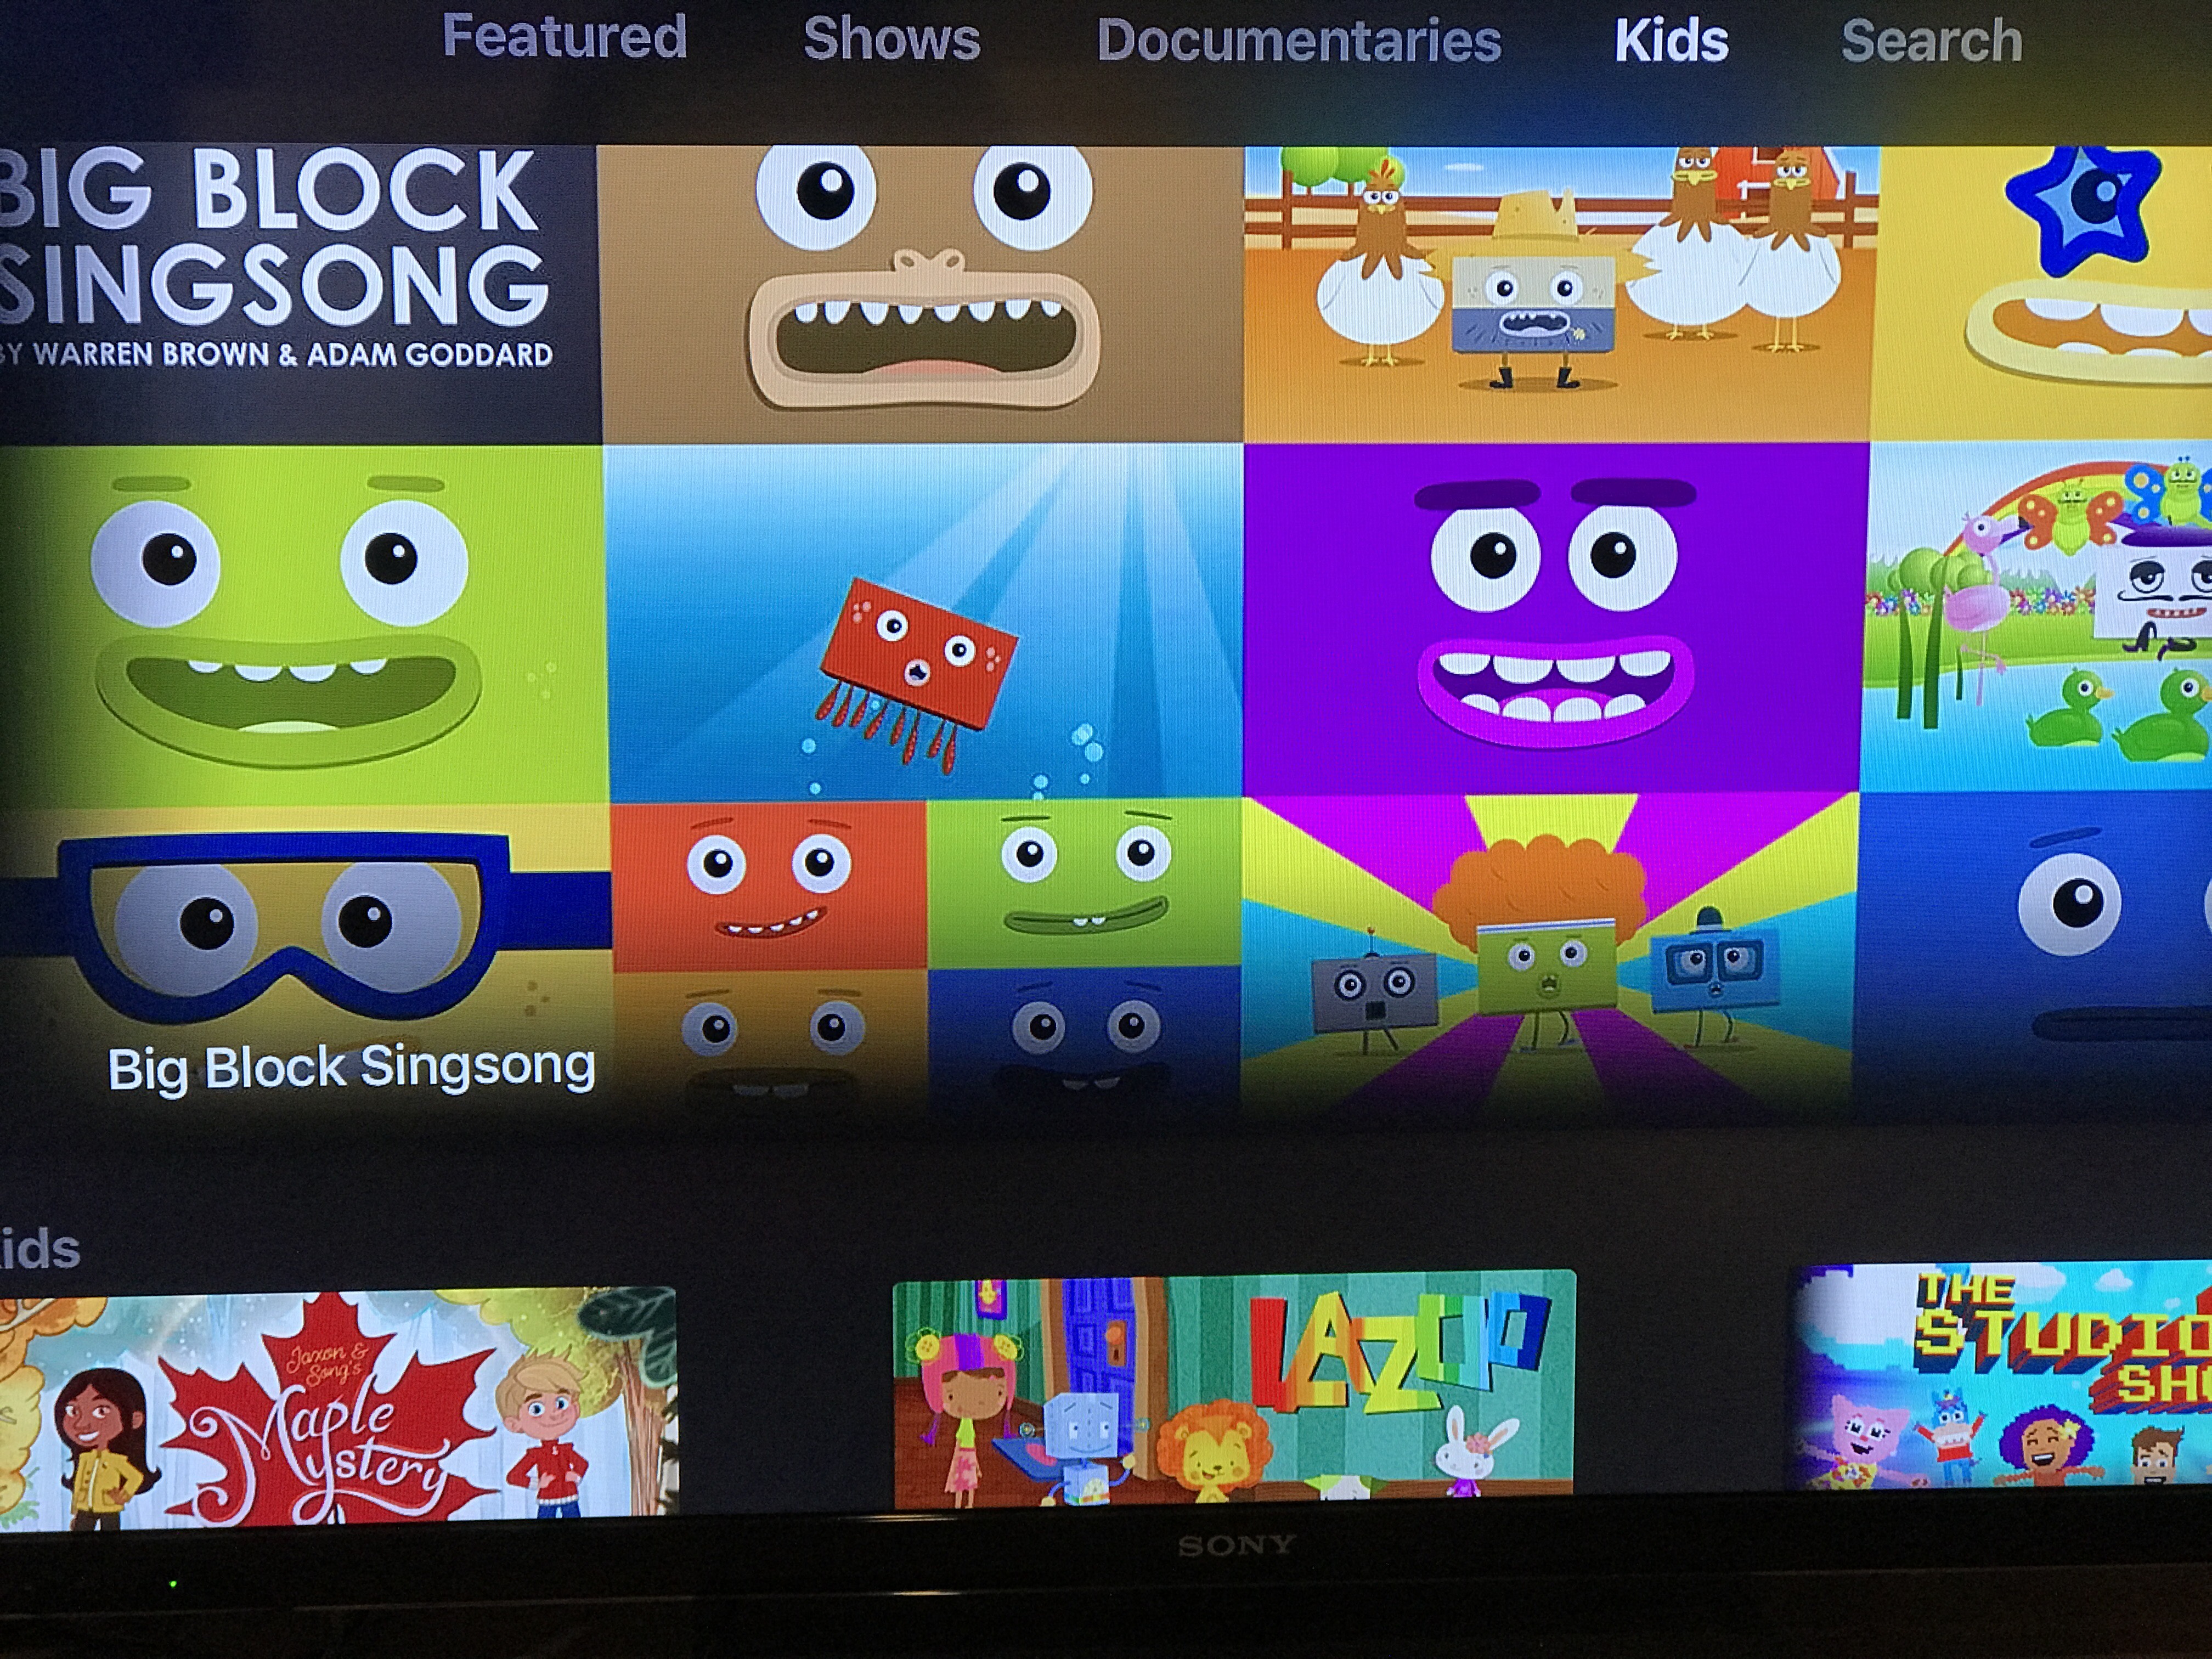 cbc tv app launches on apple tv [u] | iphone in canada blog